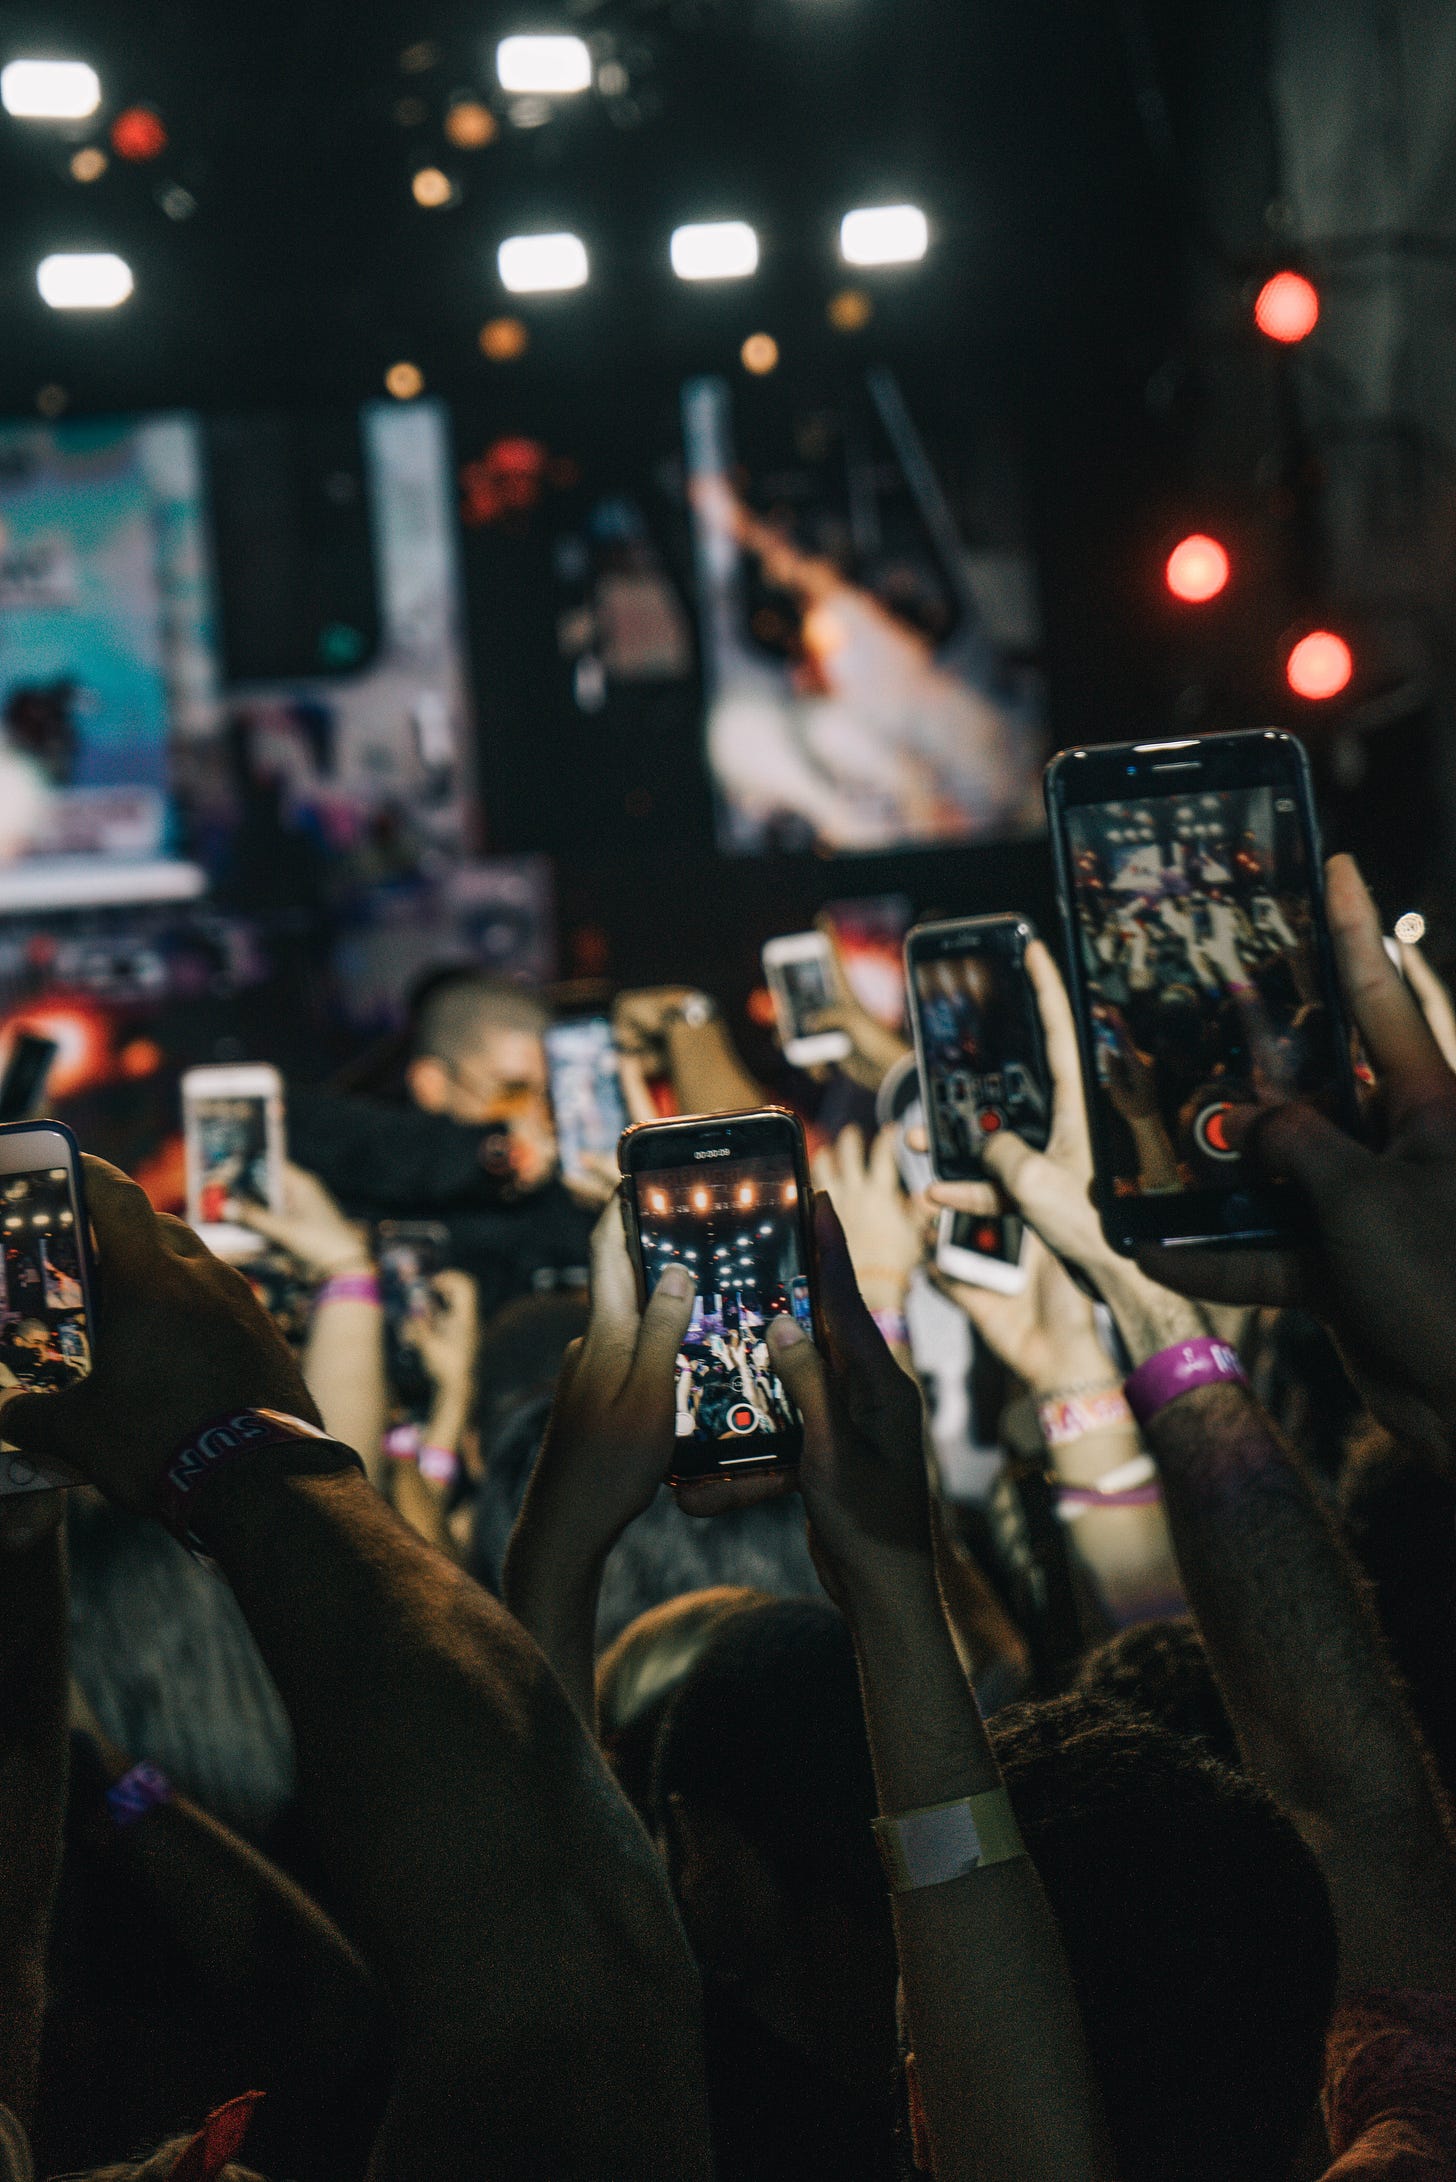 Photo of a crowd at a gig holding up their mobile phones to film the concert. You can see multiple screens showing what they are filming. Photo by Gian Cescon on Unsplash